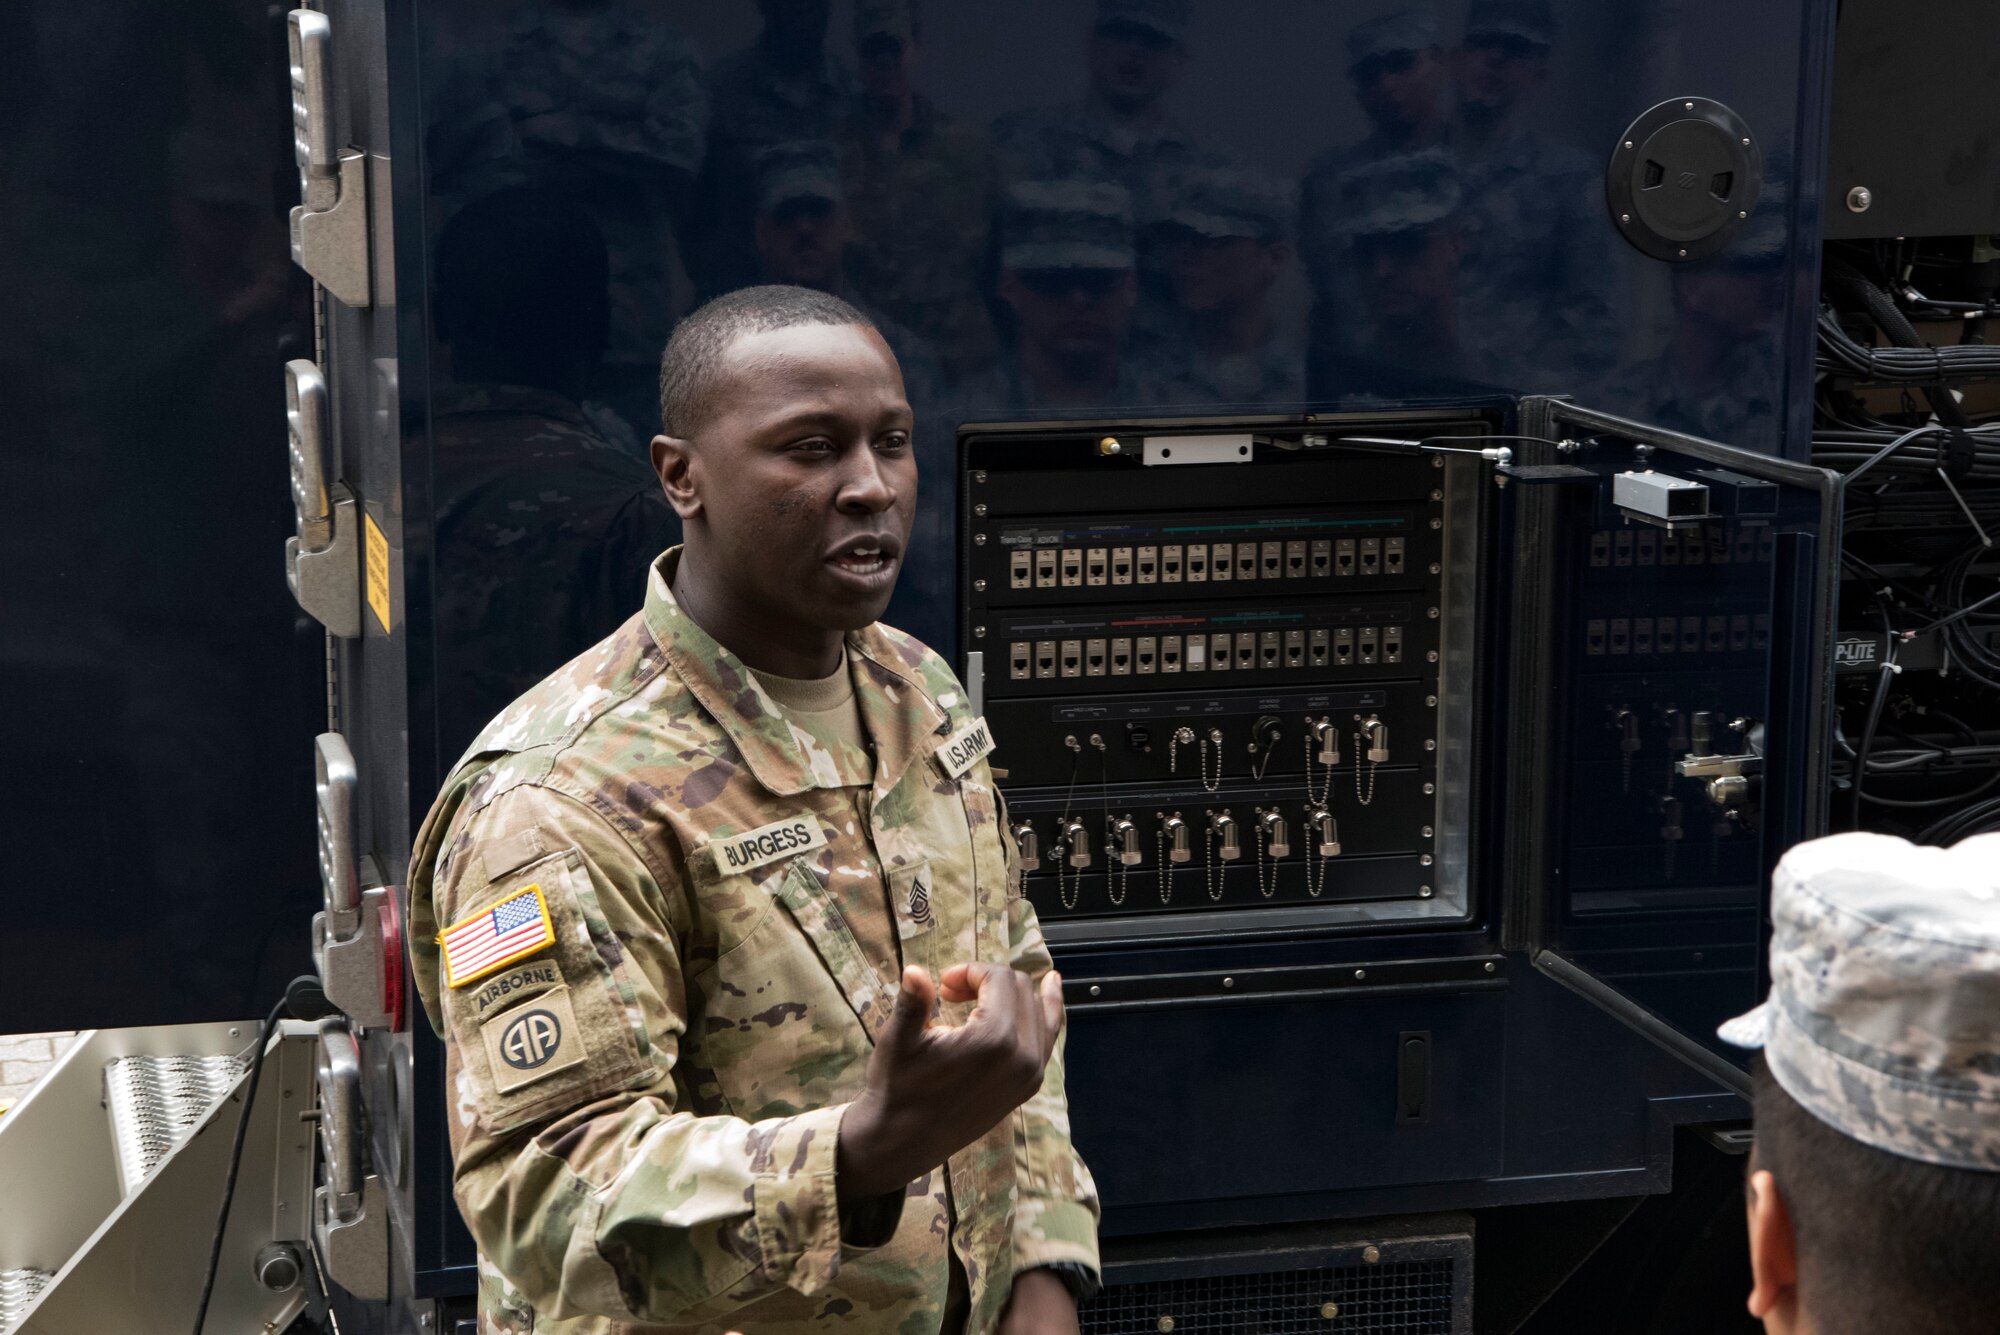 U.S. Army Master Sgt. Desmond Burgess, 773rd Civil Support Team communications chief, briefs U.S. Airmen and U.S. Army Reserve personnel about the Unified Command Suite during the 786th Civil Engineer Squadron and 773rd Civil Support Team interoperability demonstration on Ramstein Air Base, Germany, March 12, 2018. The vehicle provides secure and non-secure phone and internet services to other agencies on the scene.